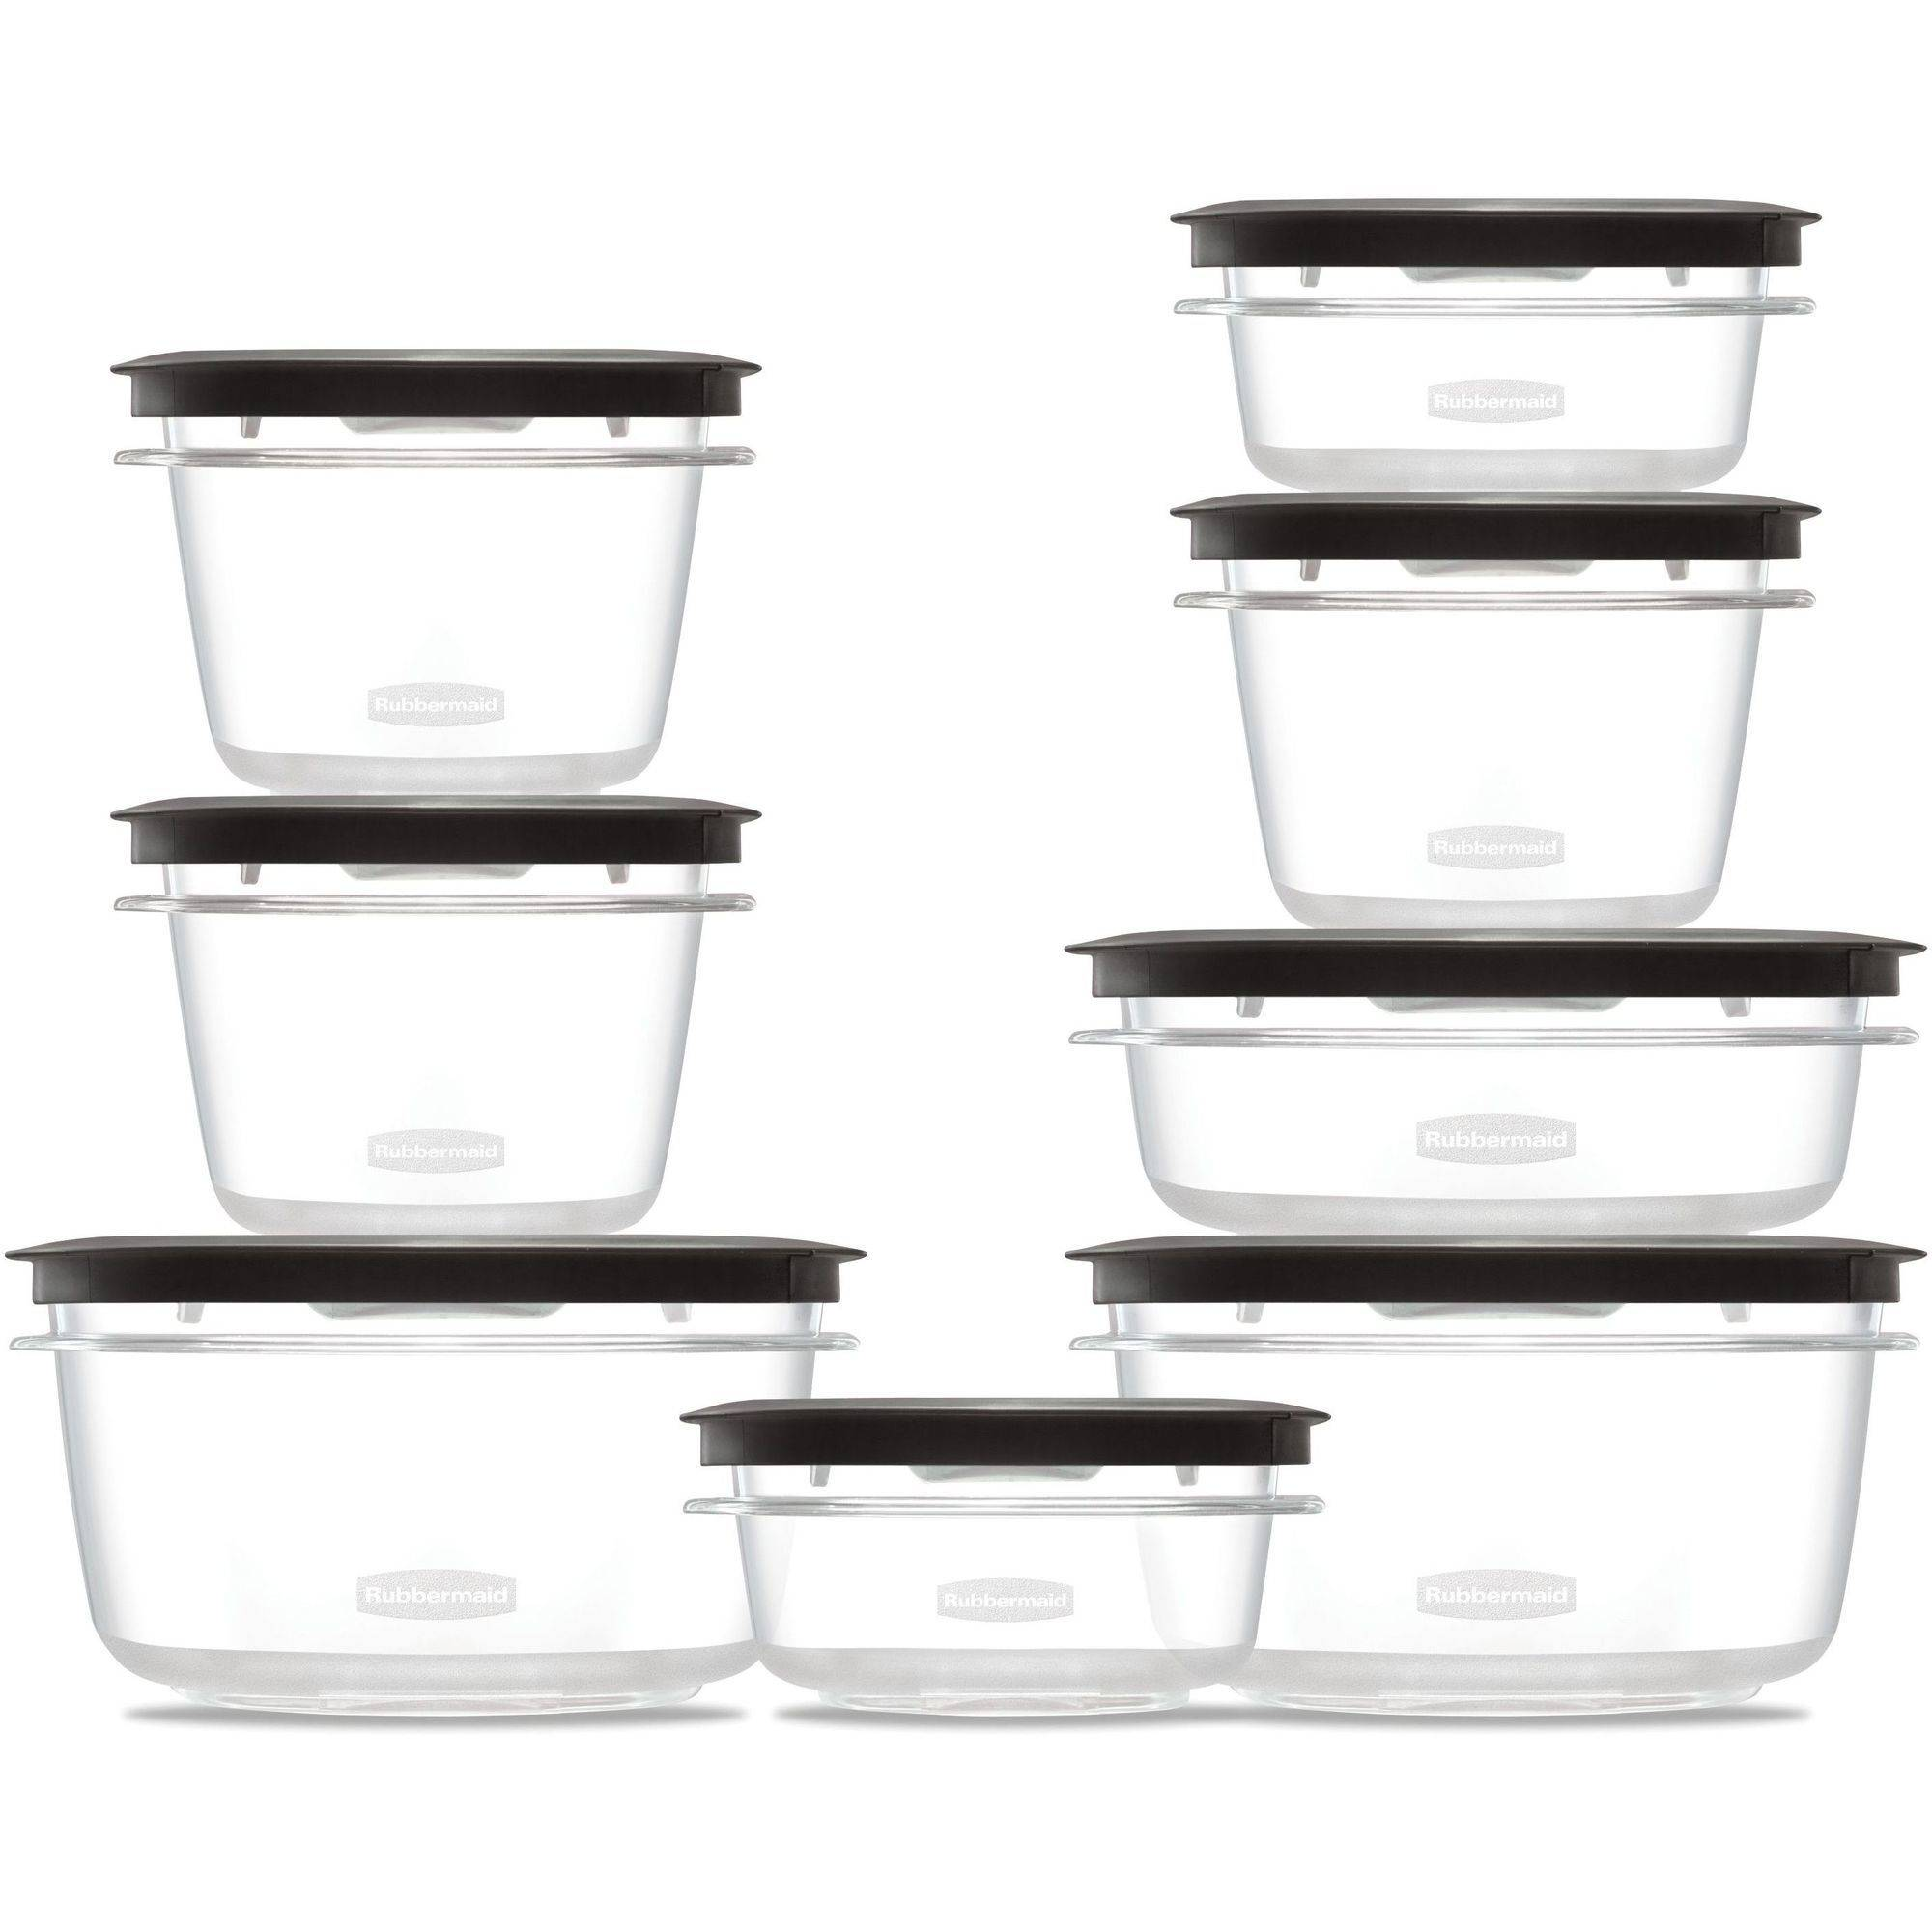 Rubbermaid Premier Food Storage Containers with Easy Find Lids (16 Piece) Only $20.73!